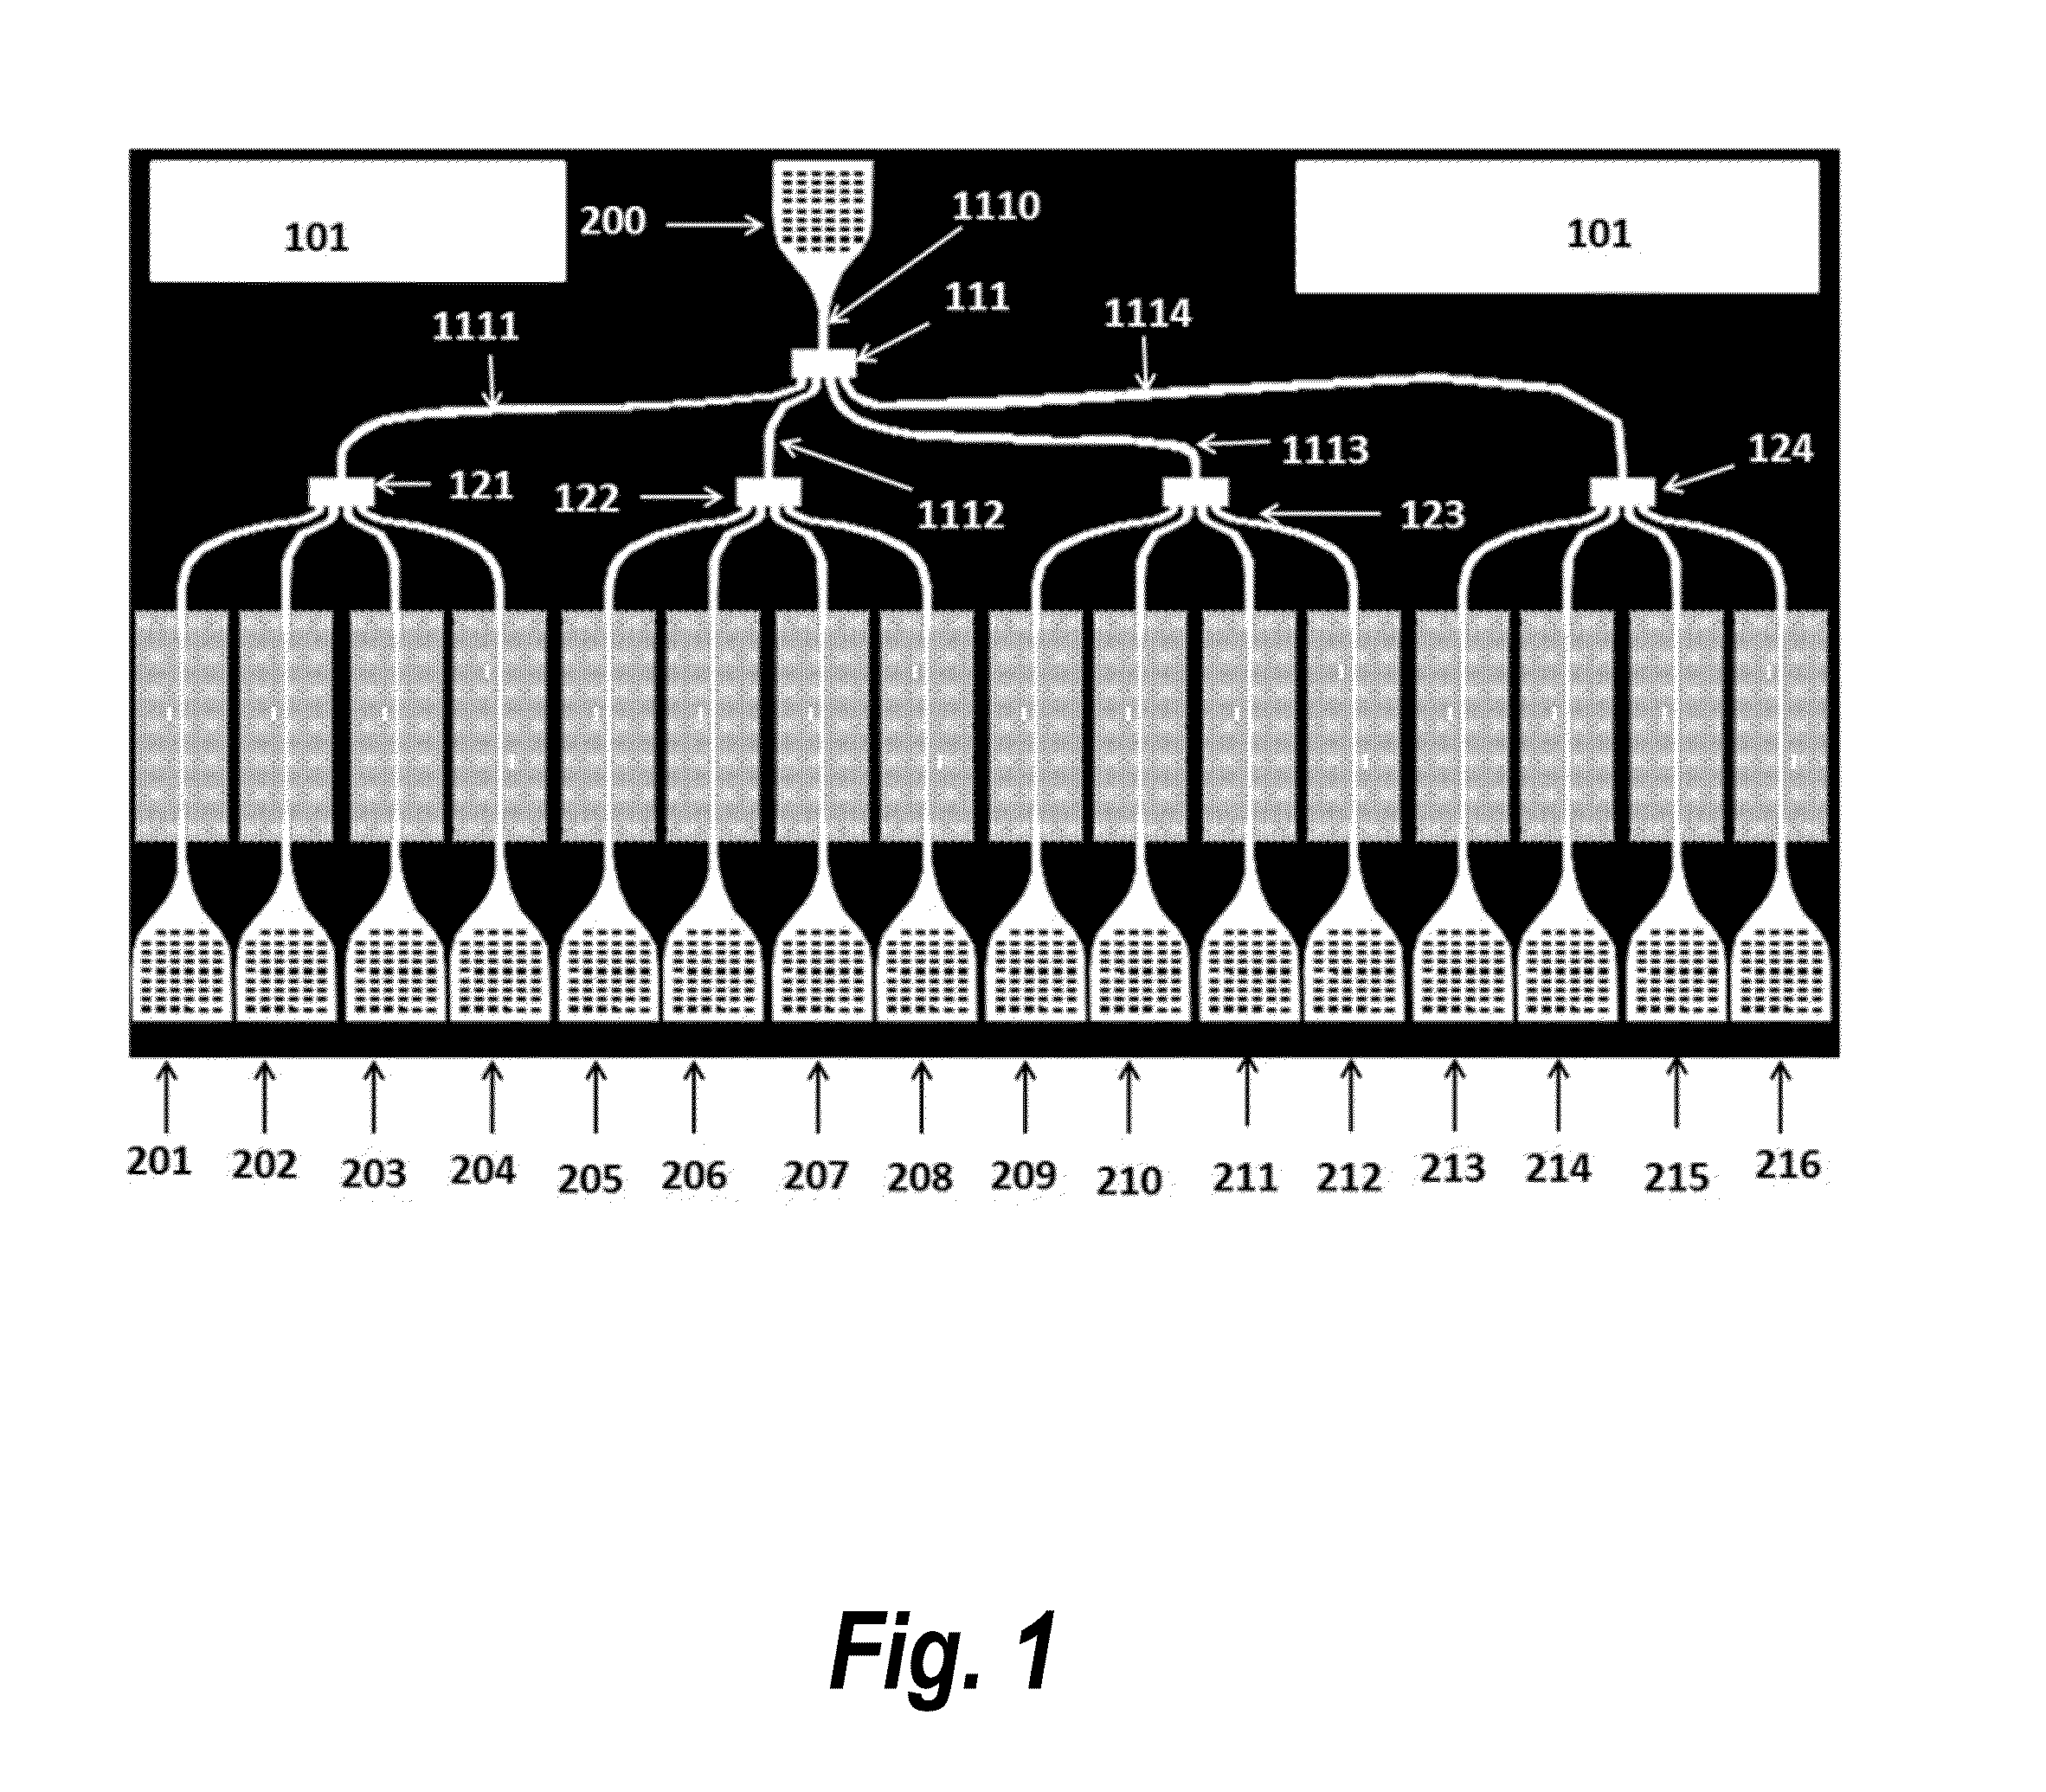 Packaged chip for multiplexing photonic crystal waveguide and photonic crystal slot waveguide devices for chip-integrated label-free detection and absorption spectroscopy with high throughput, sensitivity, and specificity